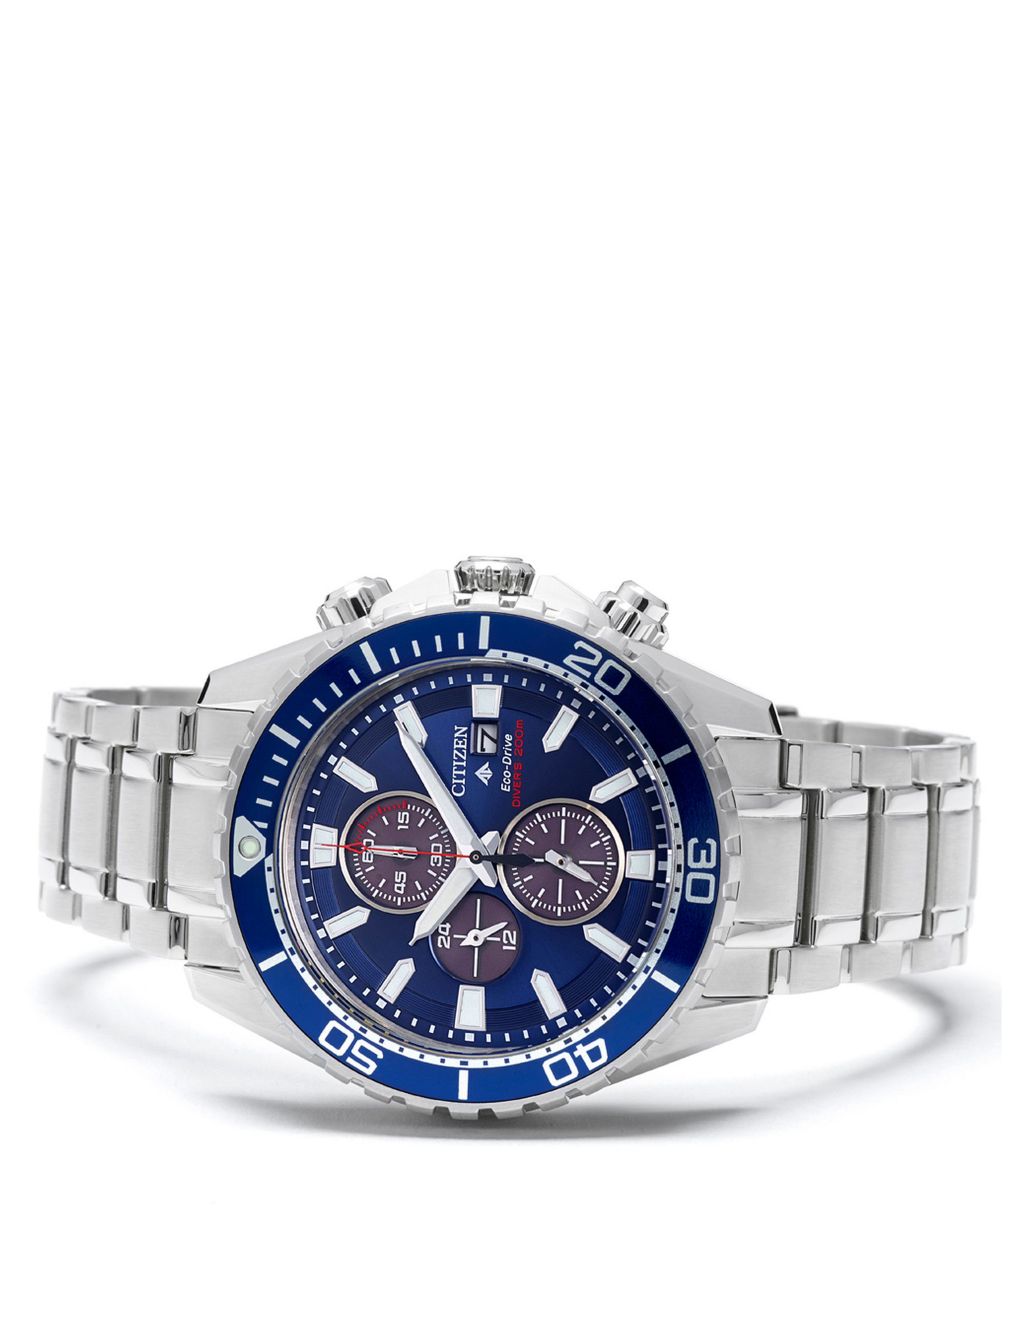 Citizen Promaster Diver's Stainless Steel Chronograph Watch image 2